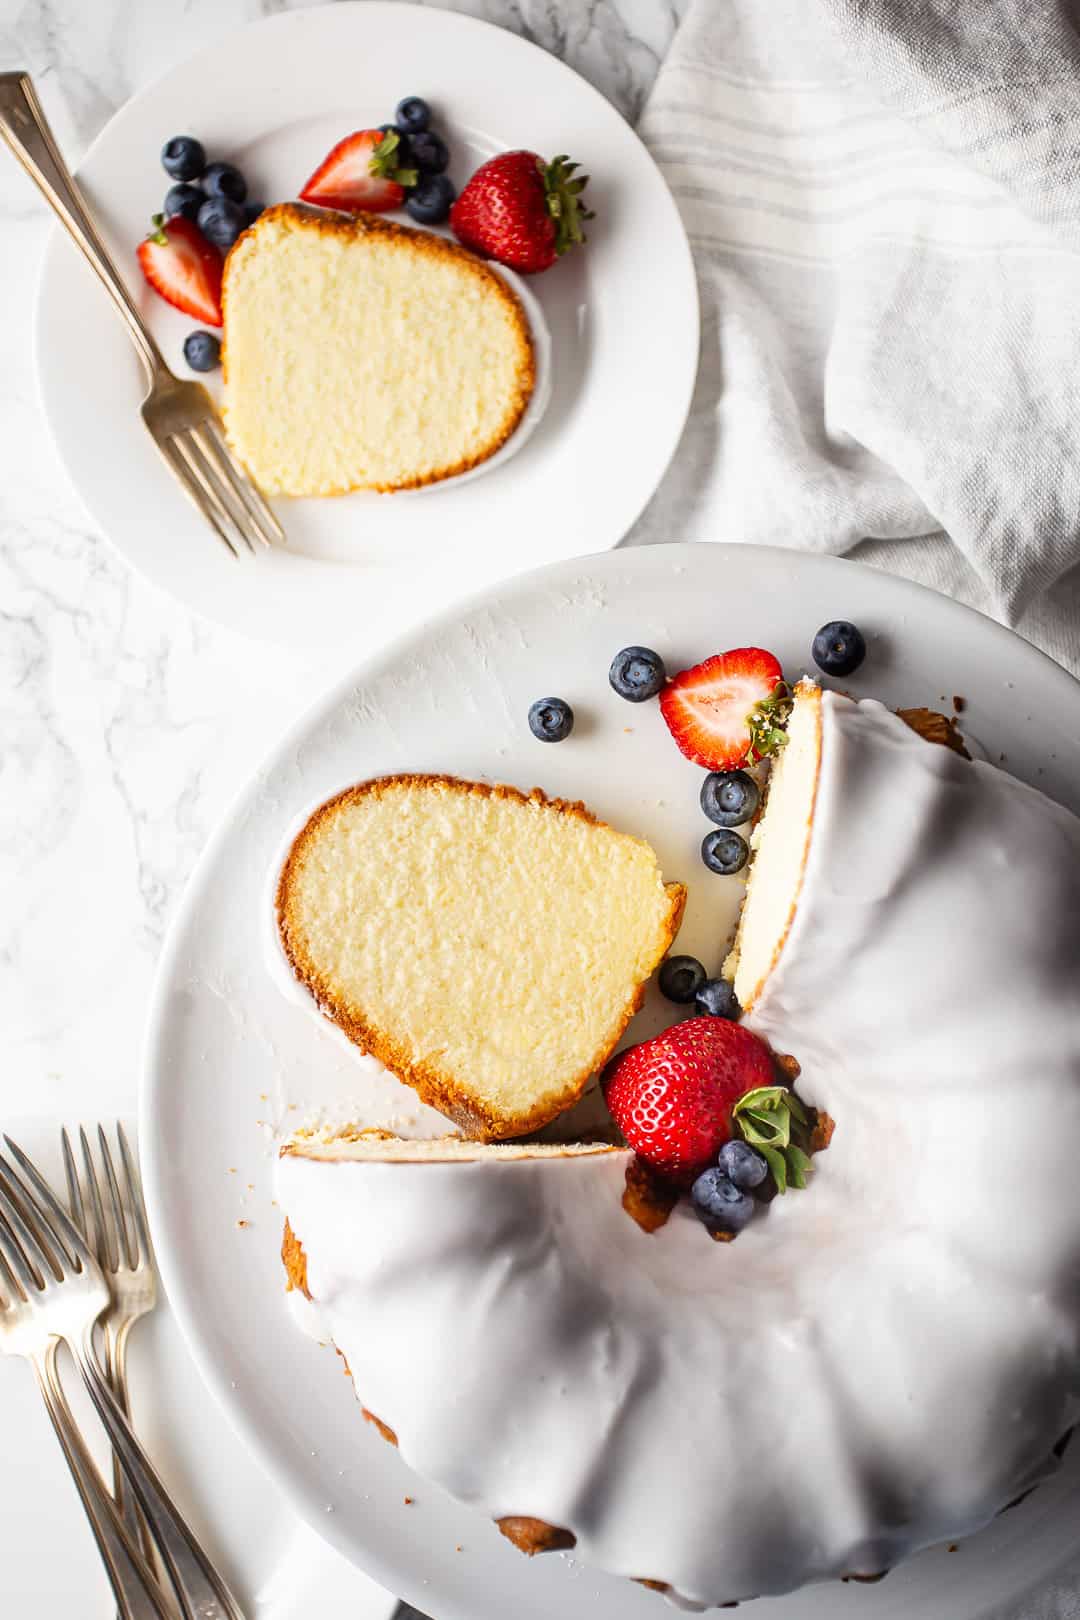 Overhead image of a pound cake recipe with cream cheese, prepared, baked, and sliced.